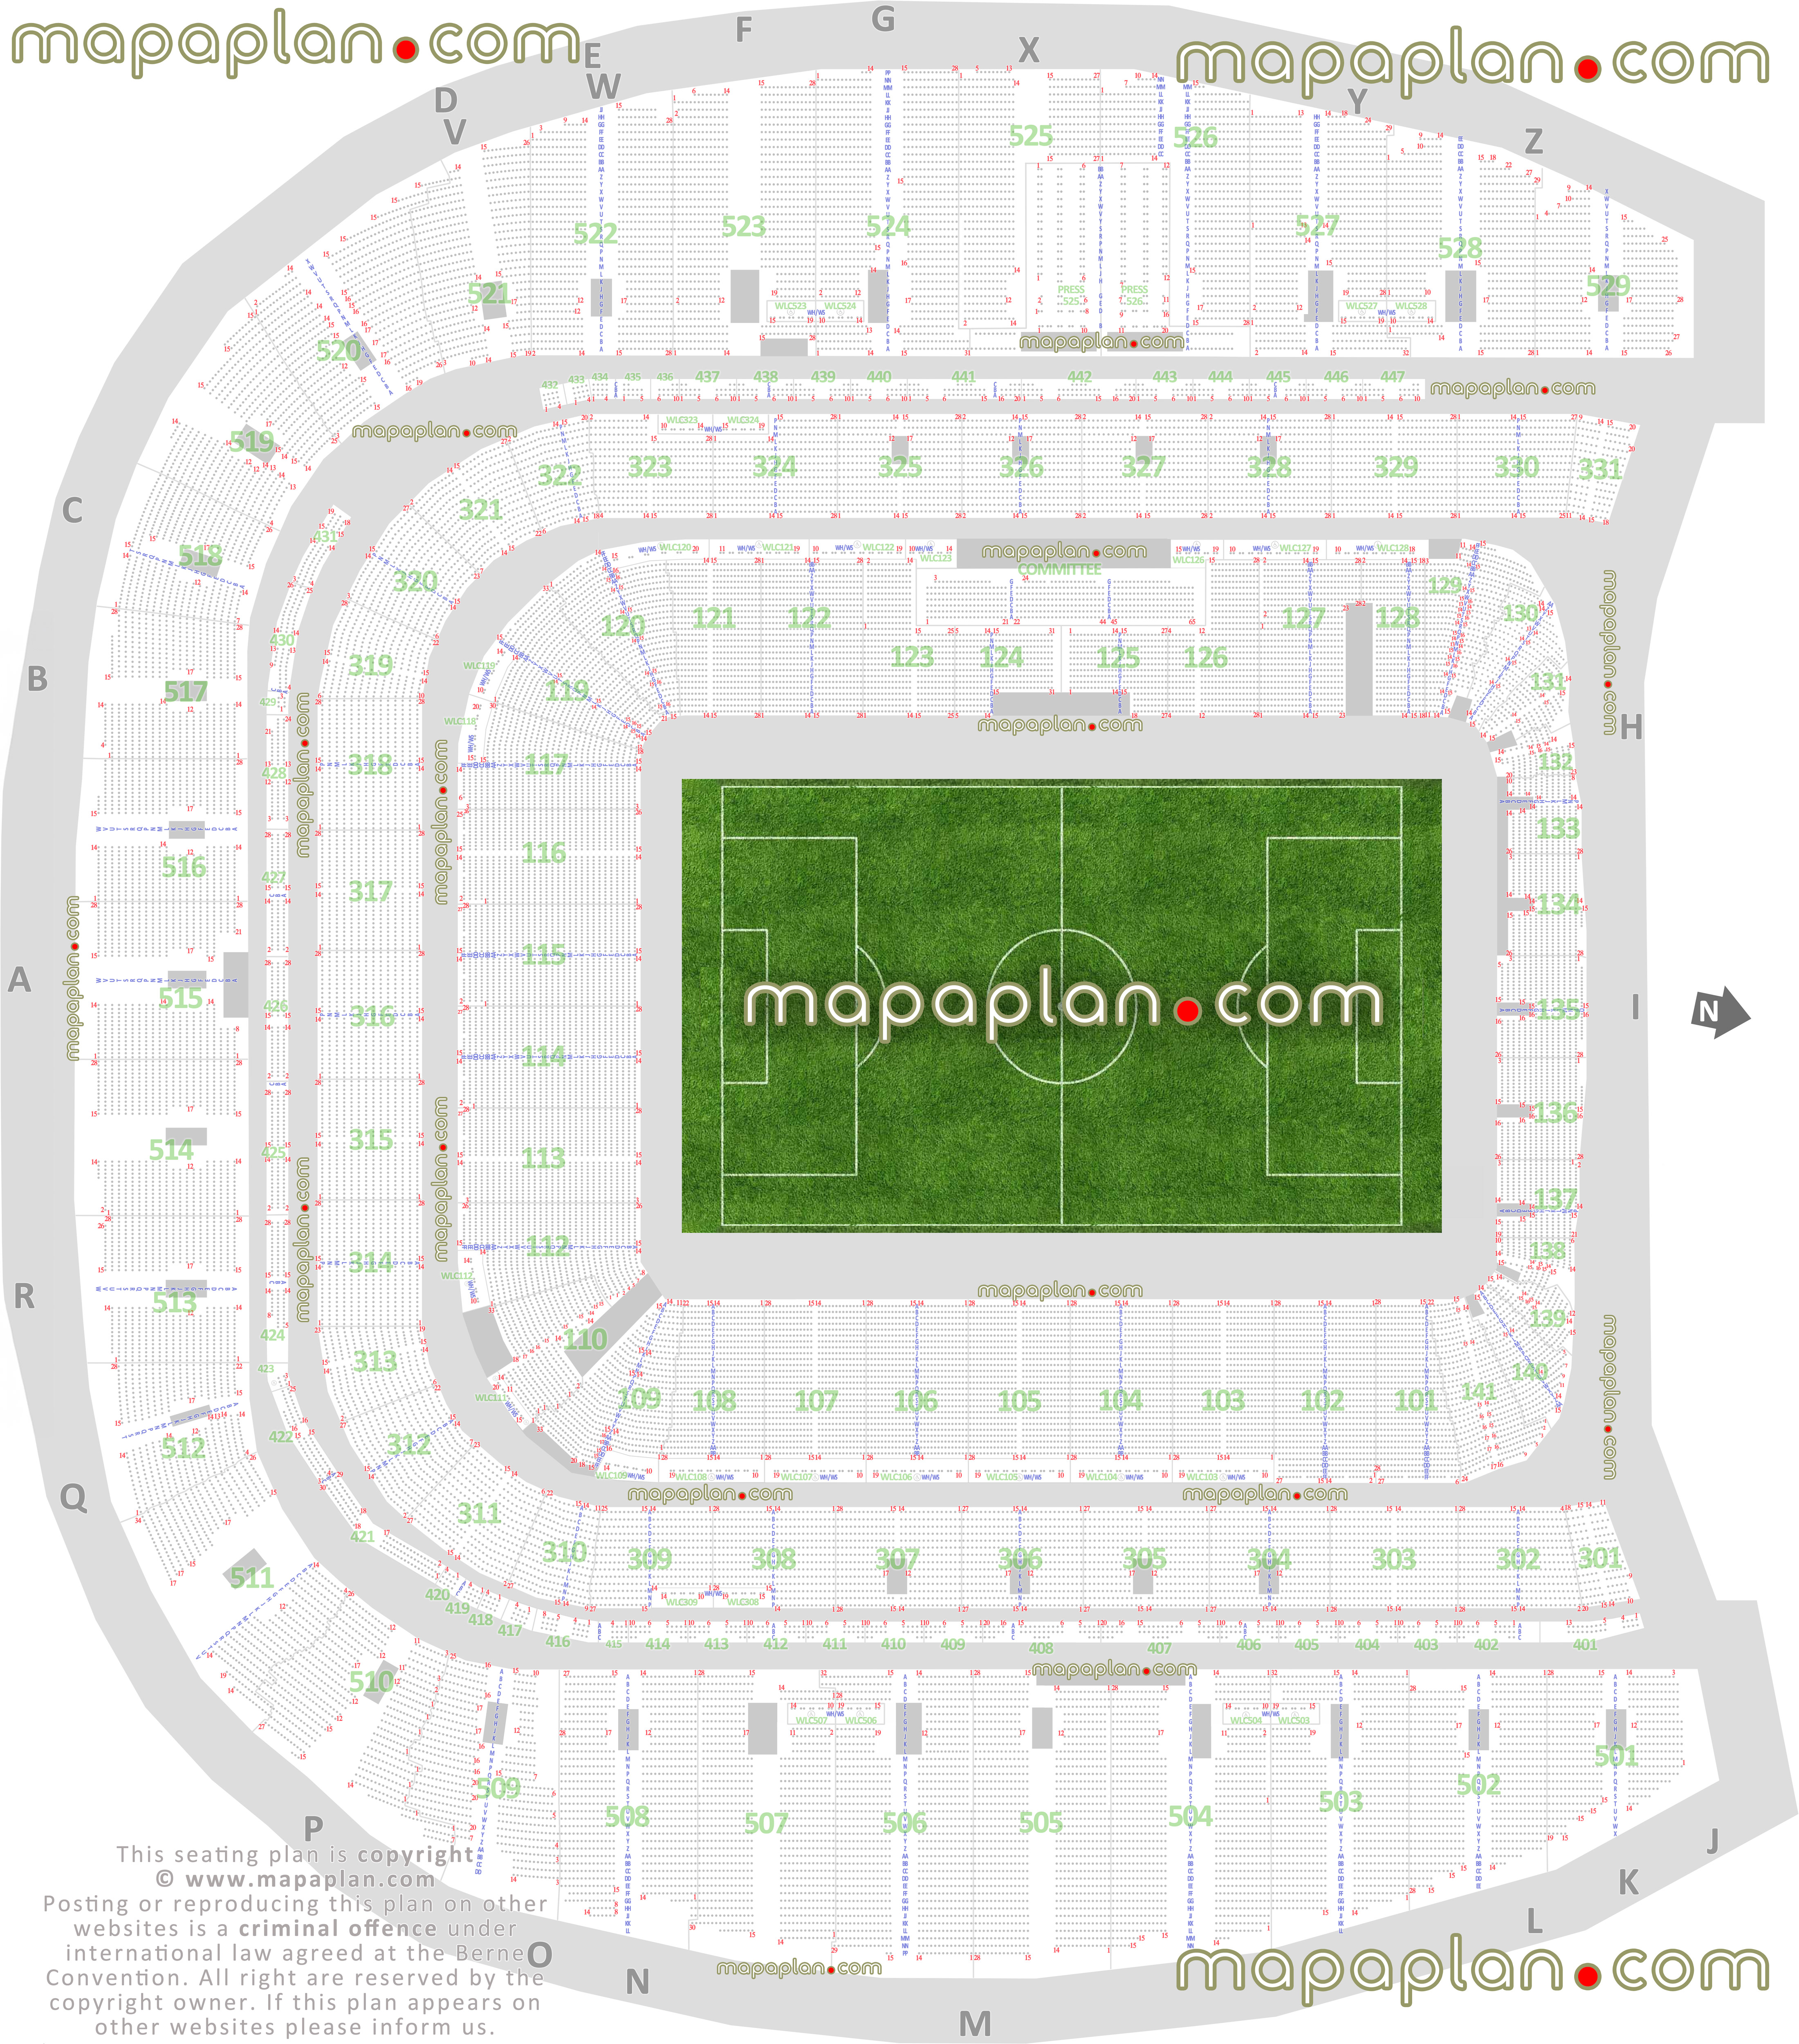 Dublin Aviva Stadium seat finder plan find best seats football games full exact row numbering system seats per row individual find seat locator best interactive seat finder tool precise detailed location data